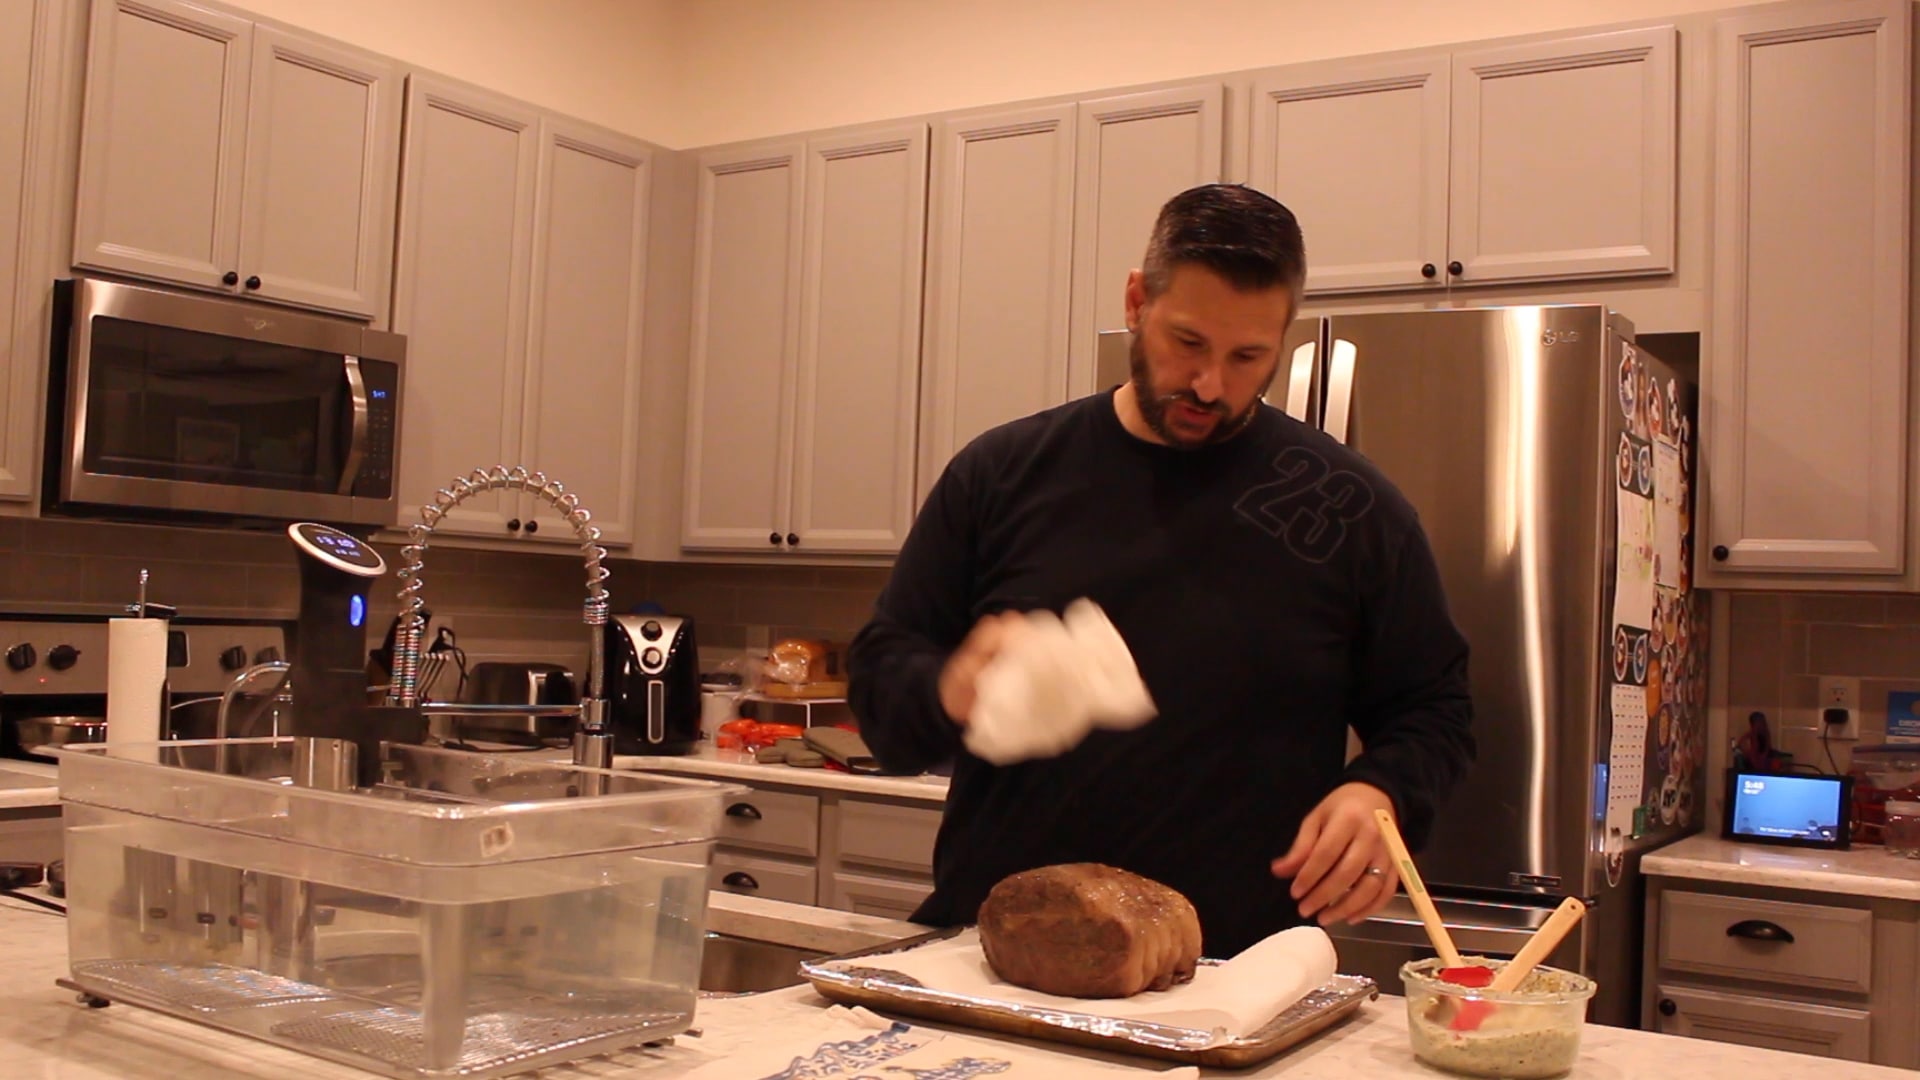 https://dadgotthis.com/wp-content/uploads/2020/01/dad-drying-the-sous-vide-prime-rib-roast-with-paper-towels.jpg